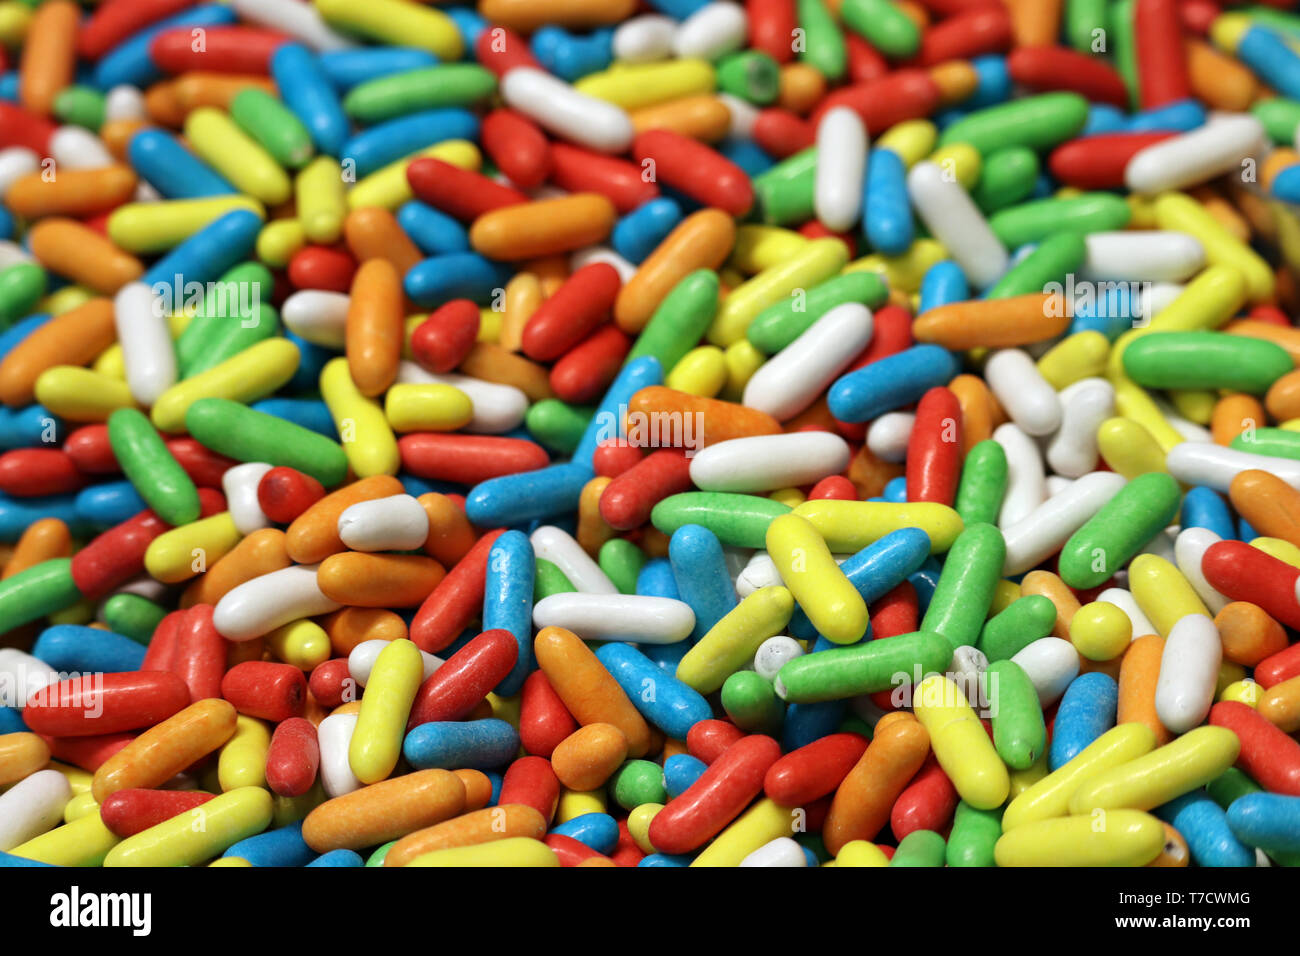 Colorful candy, selective focus. Red, green, blue, white and yellow sweets, pile of fruit candies for background Stock Photo